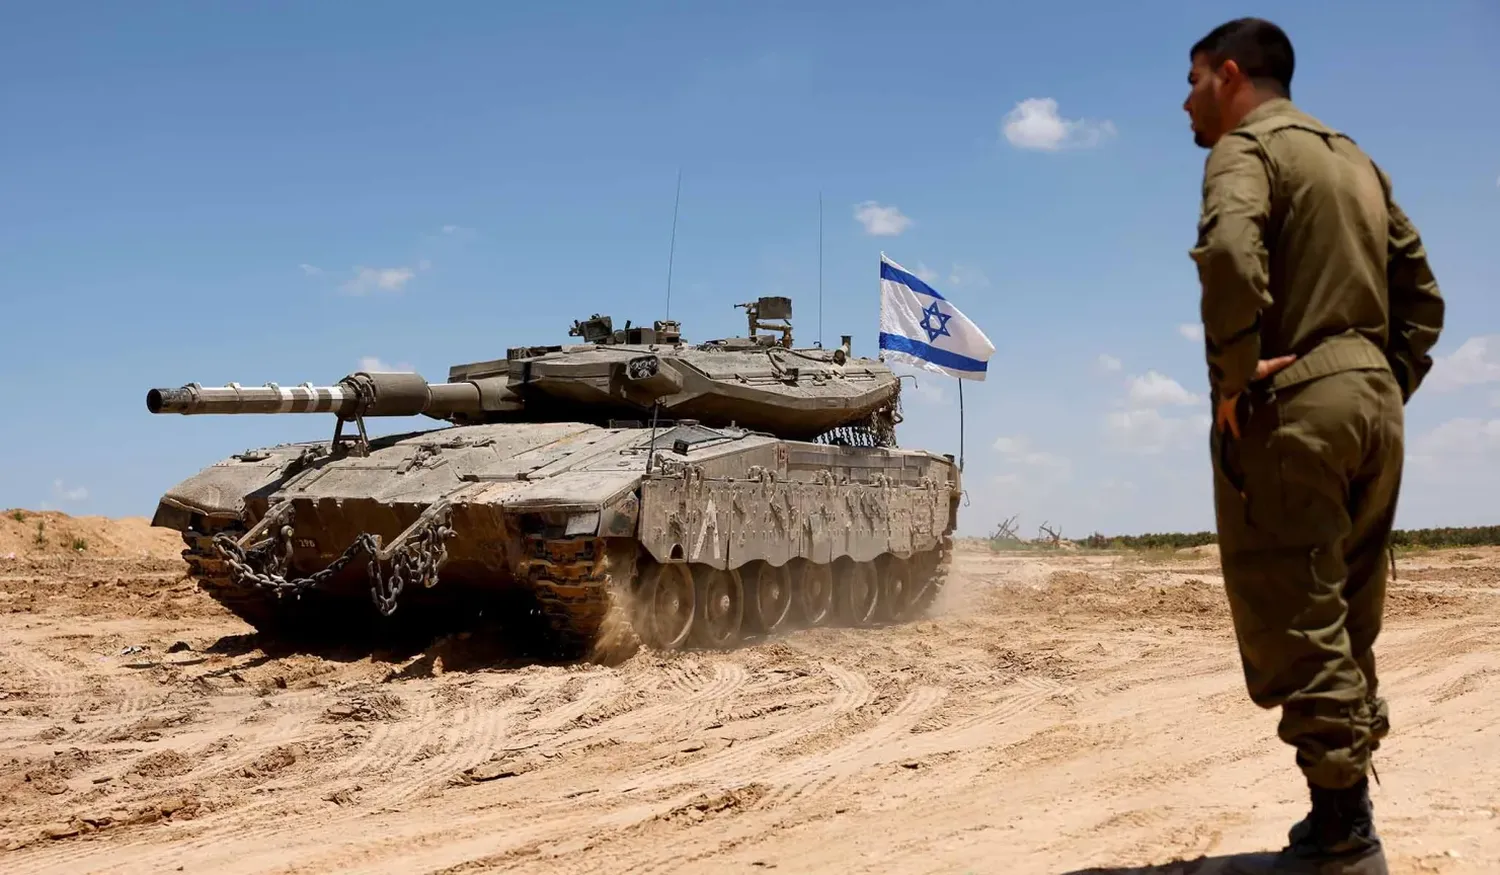 An Israeli soldier stands in a tank, amid the ongoing conflict between Israel and Hamas, near the Israel-Gaza border, in Israel.